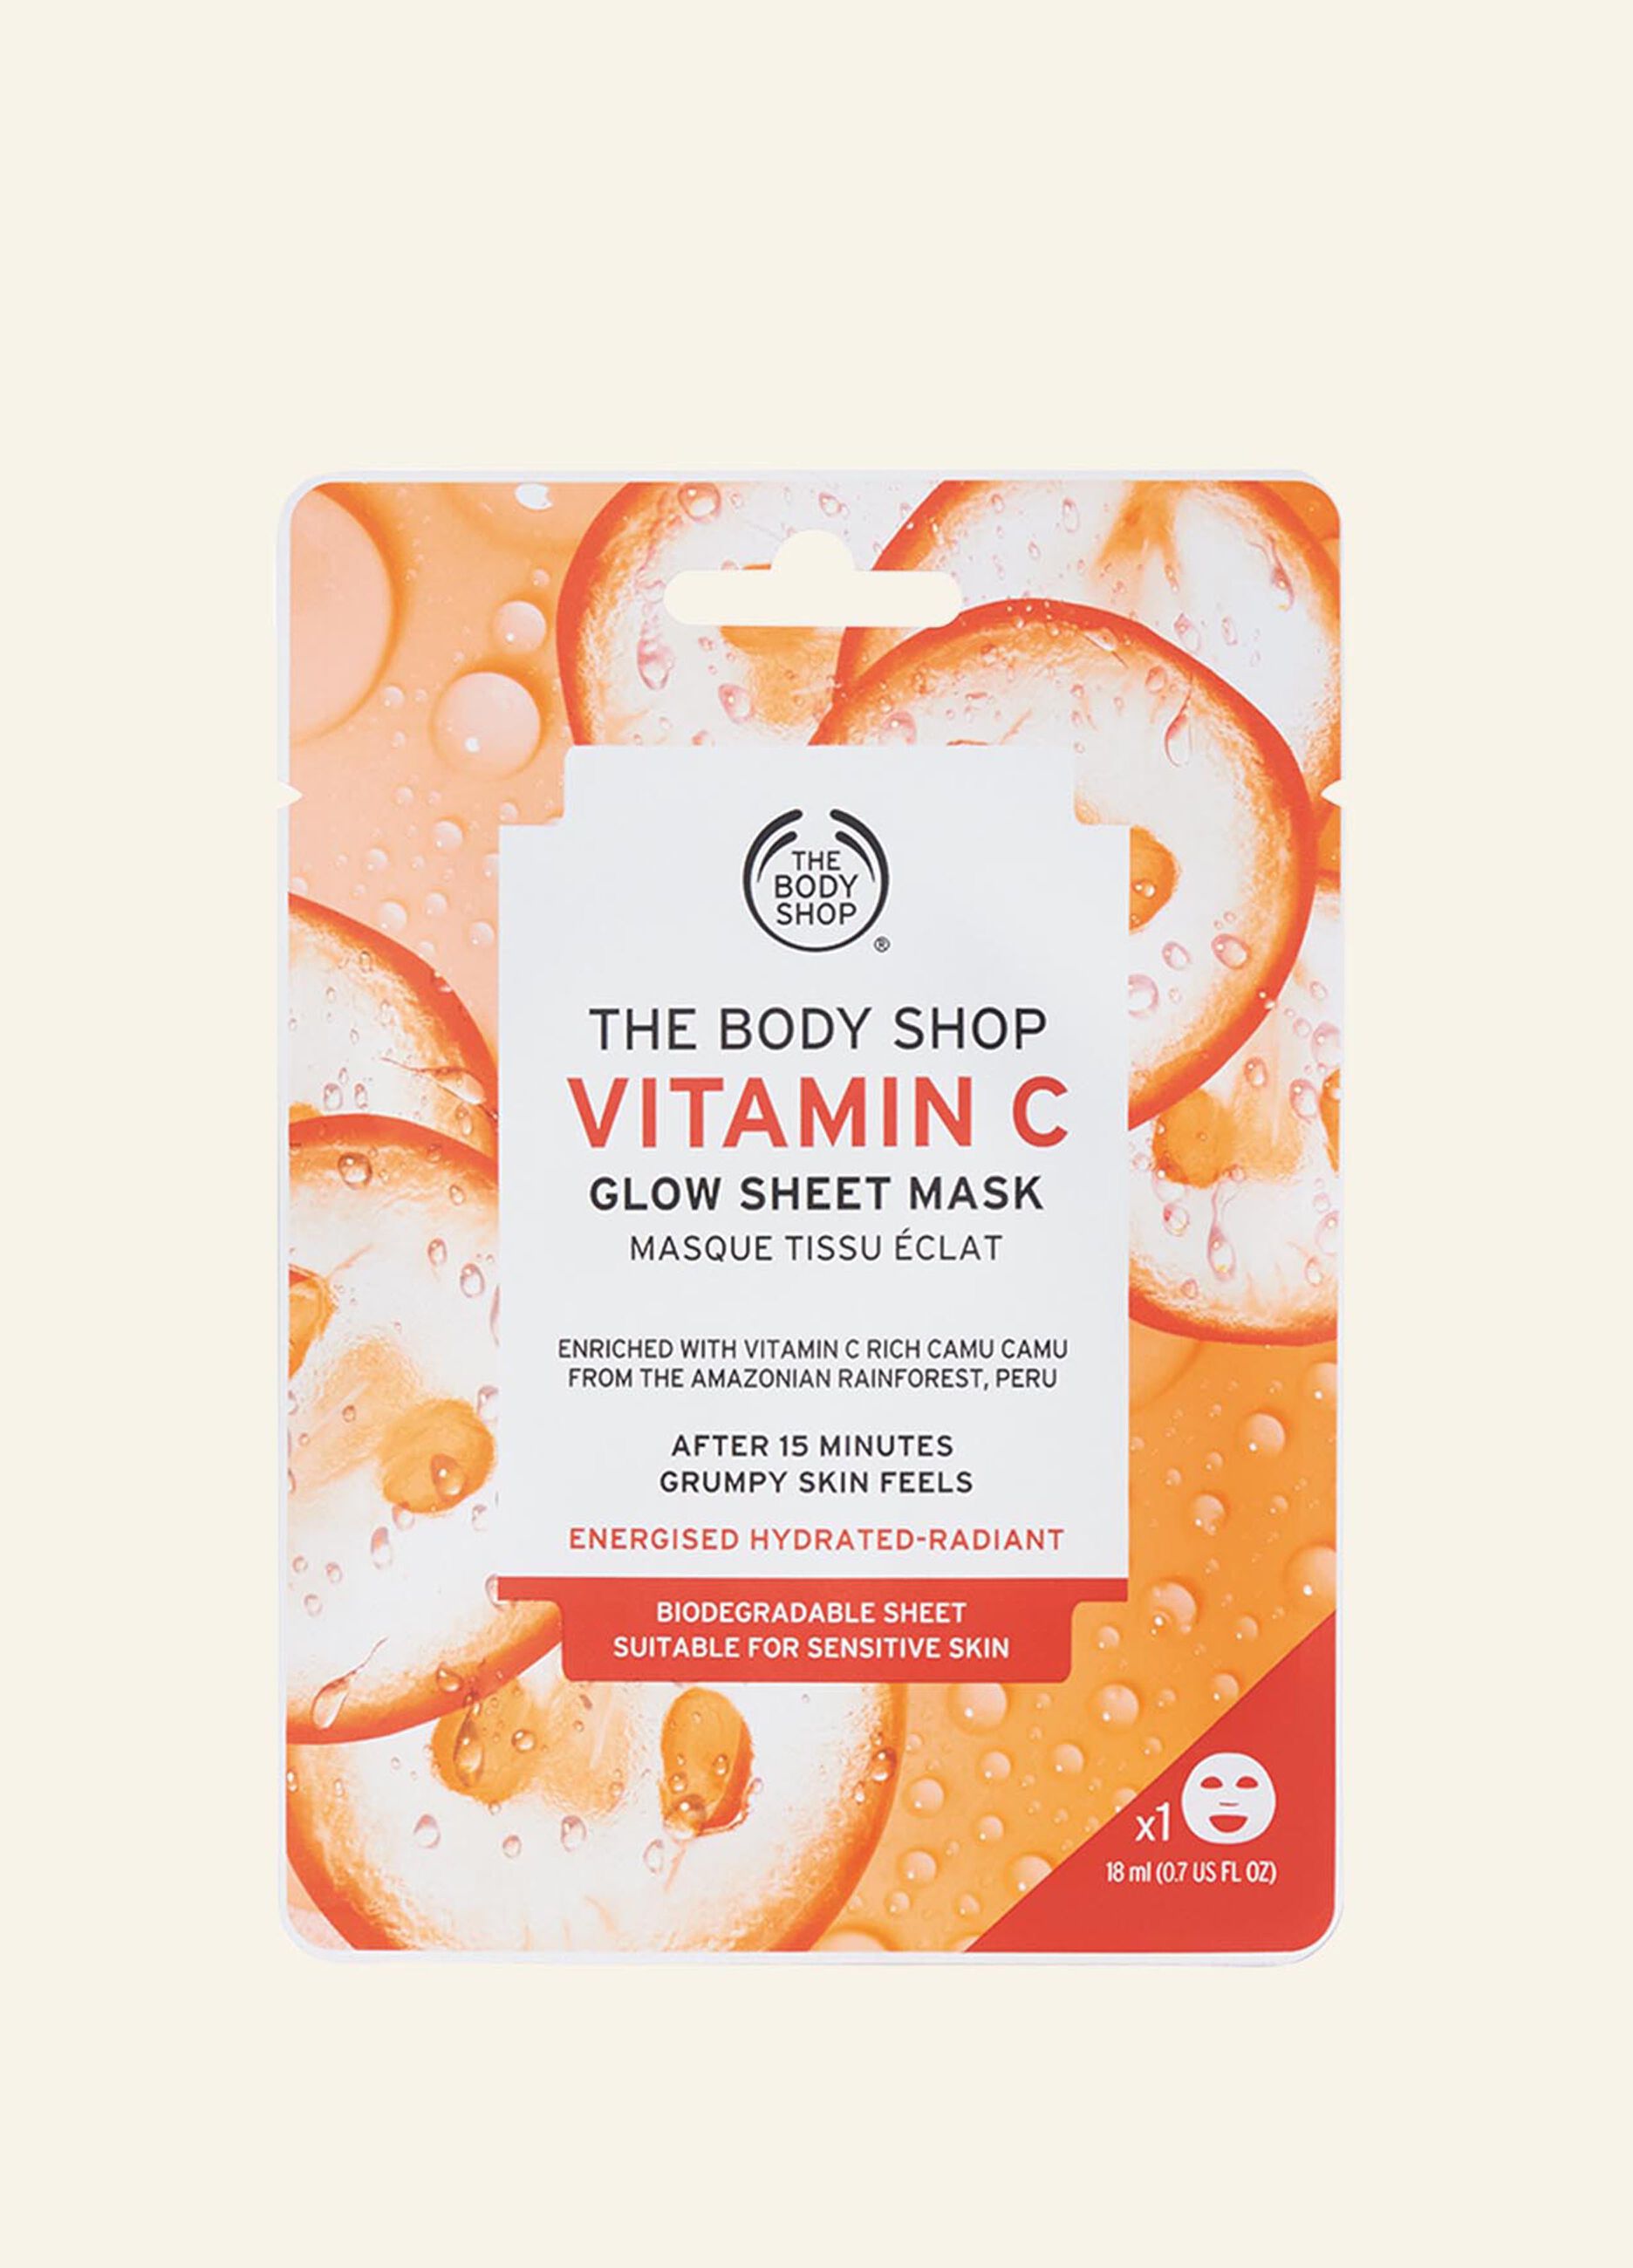 The Body Shop fabric mask with vitamin C